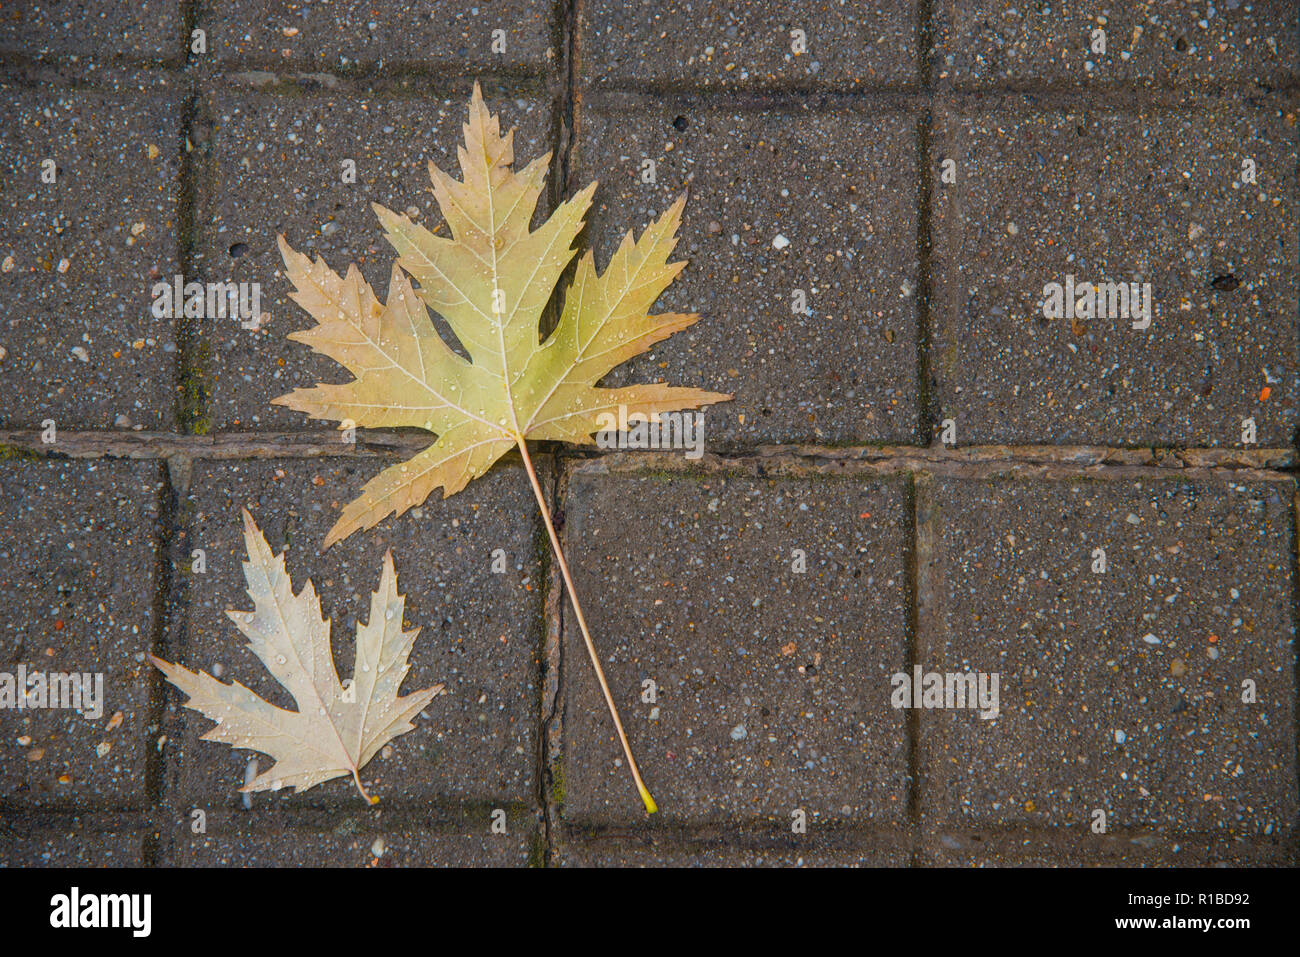 Two wet leaves on pavement. Stock Photo